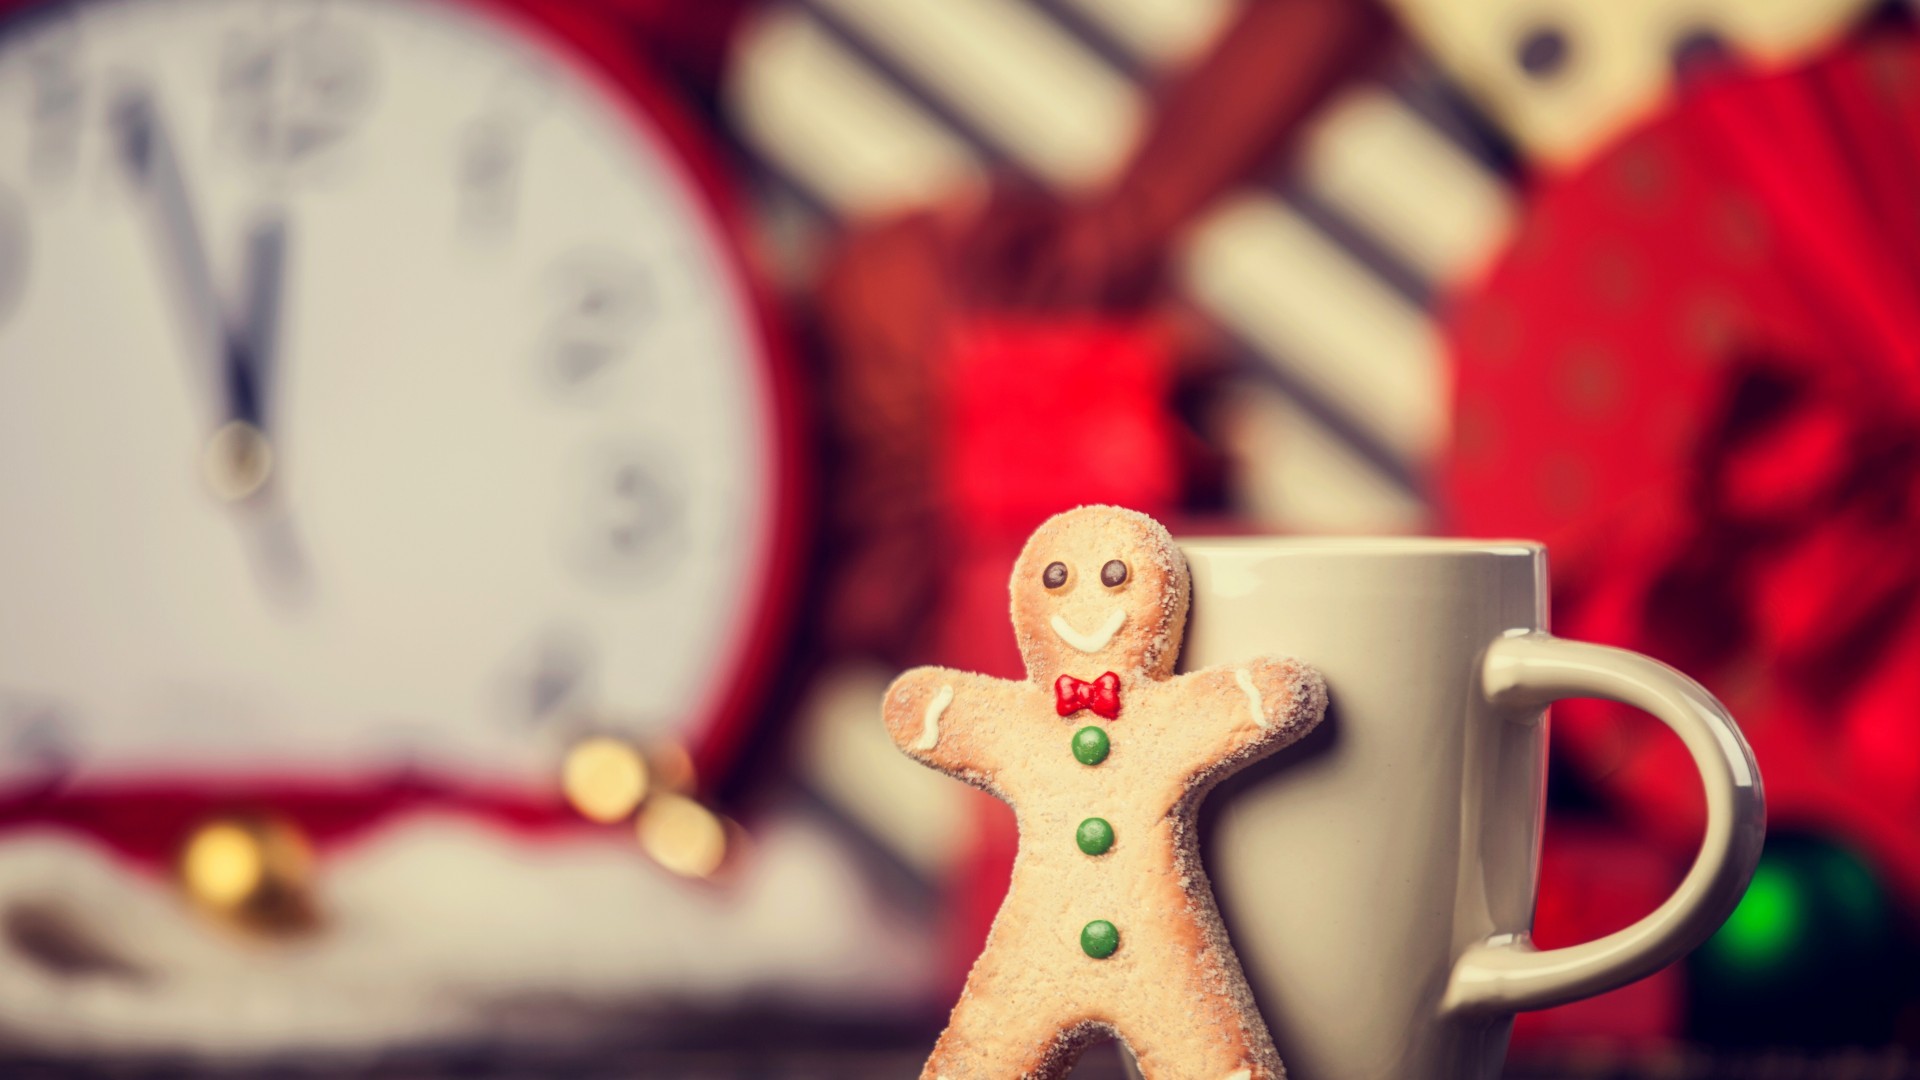 General 1920x1080 food blurred gingerbread humor sweets cookies gingerbread man cup depth of field clocks time blurry background